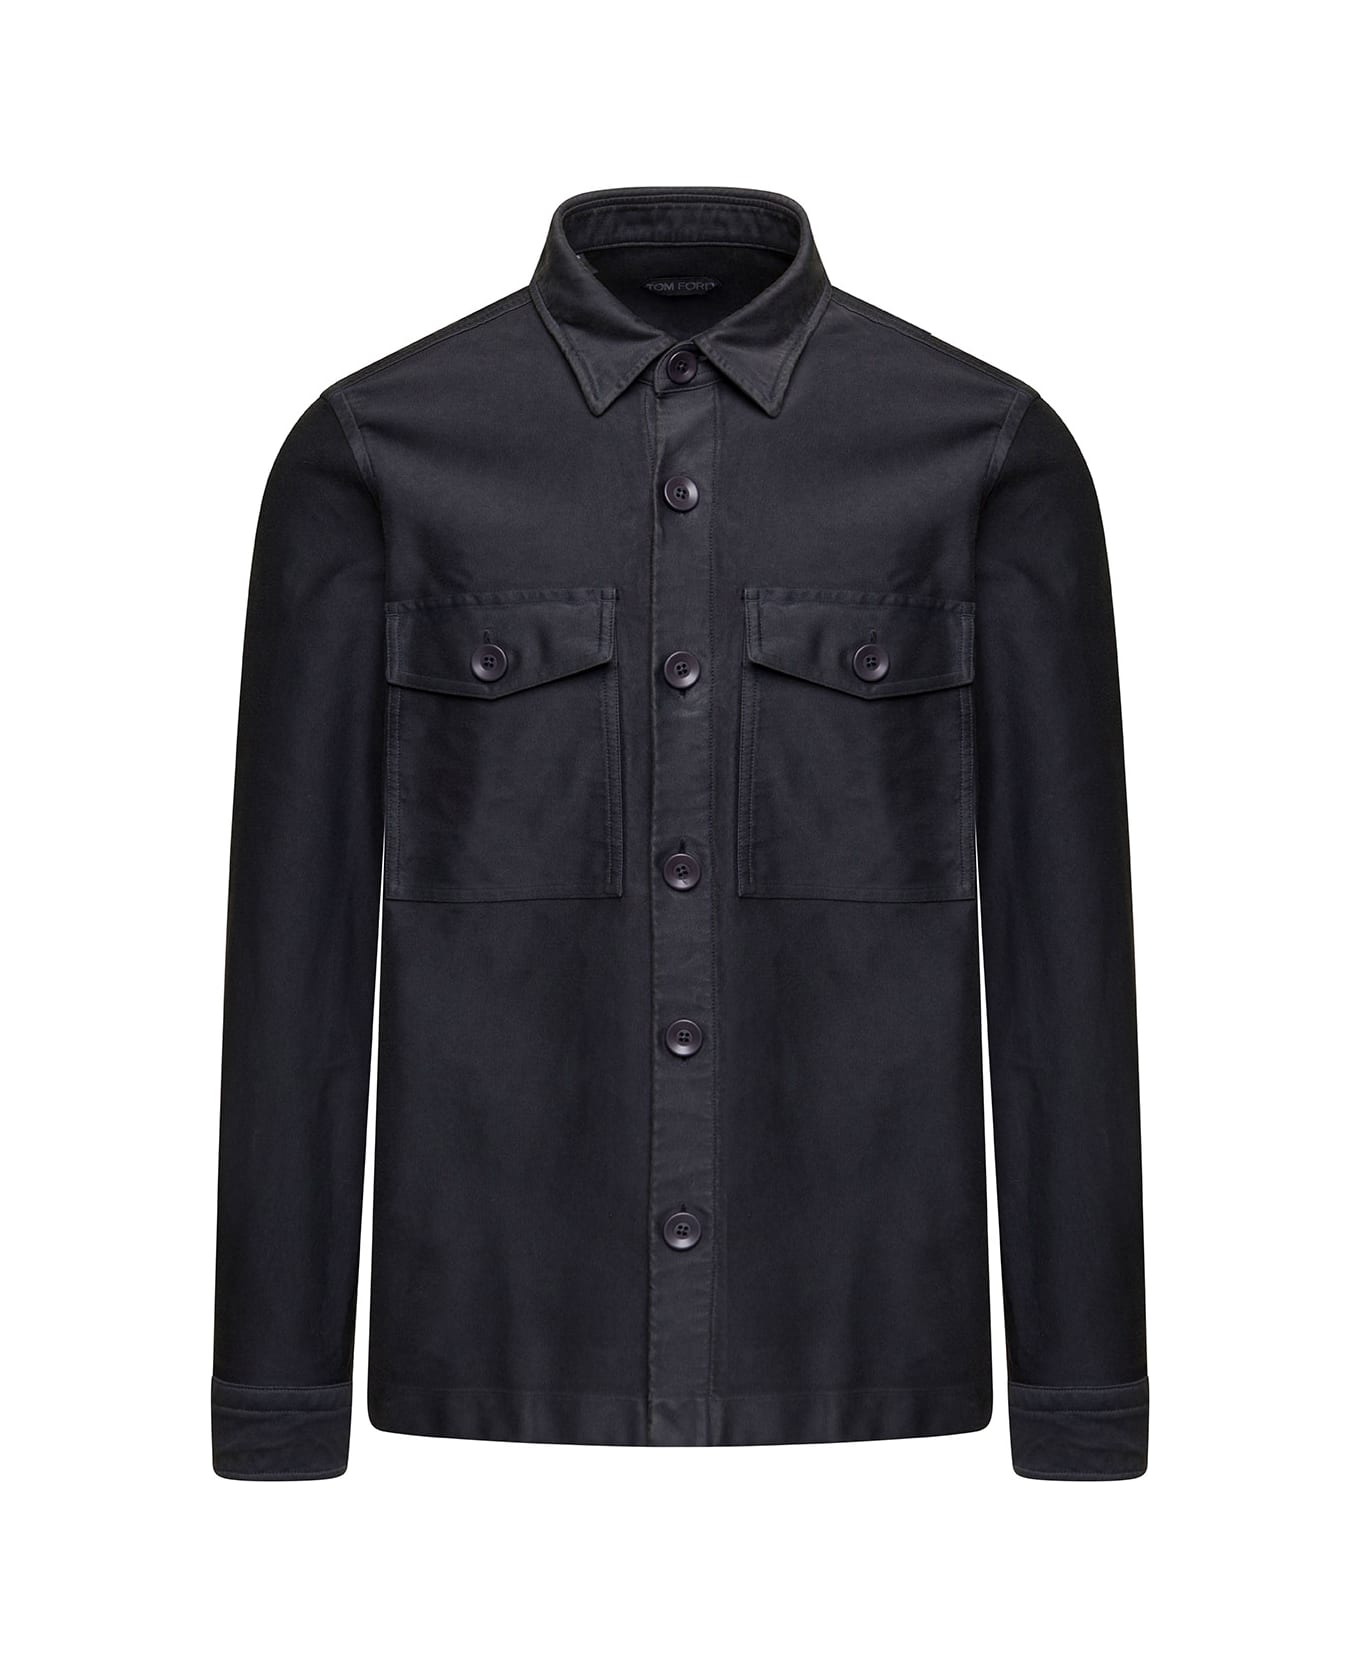 Tom Ford Grey Flannel Shirt With Classic Collar And Pockets On The Chest In Cotton Man - Grey